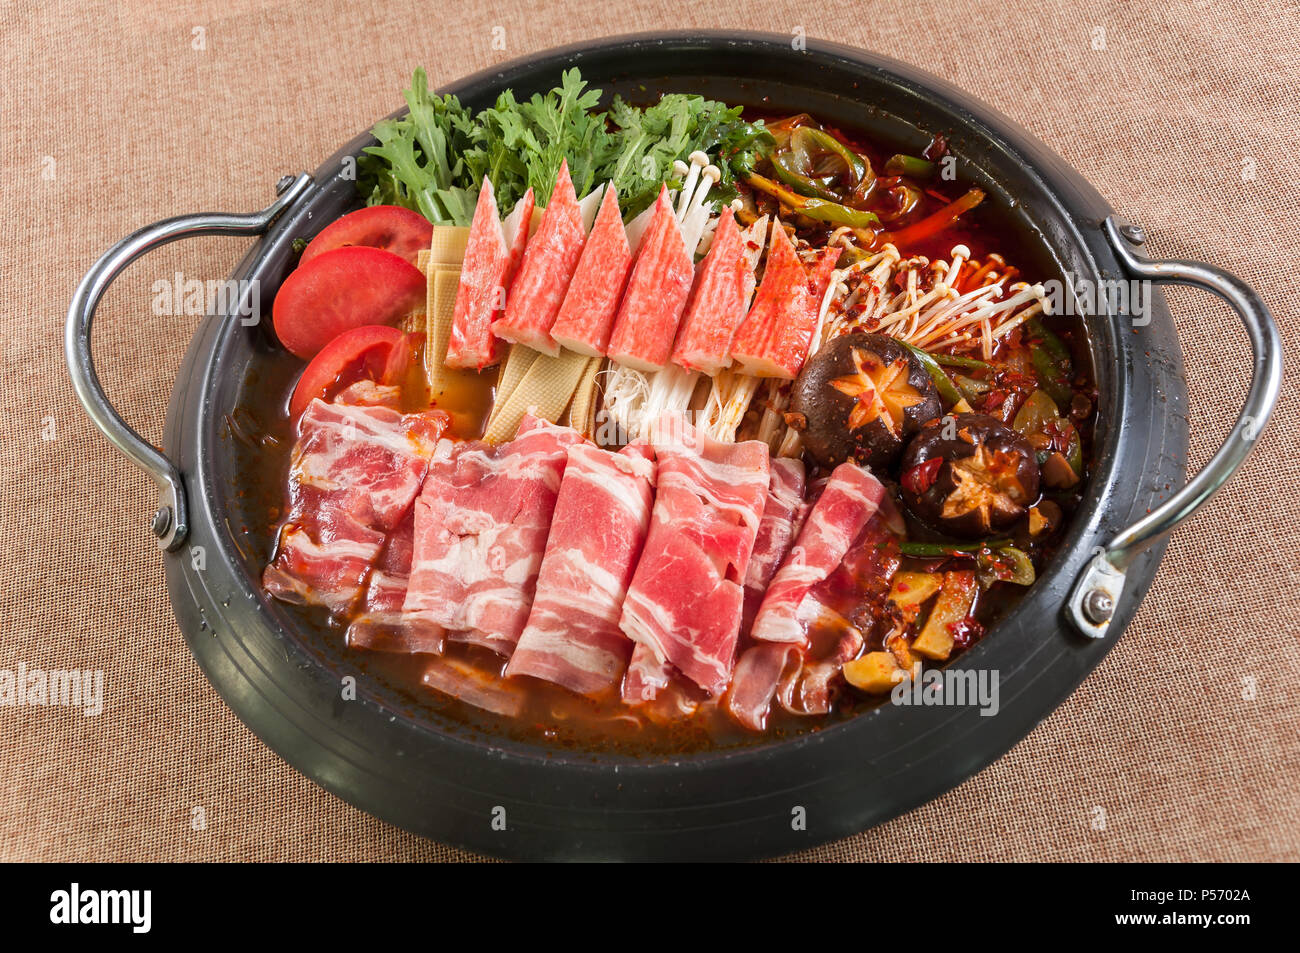 Korean Hot Pot Stock Photo, Picture and Royalty Free Image. Image 84137213.